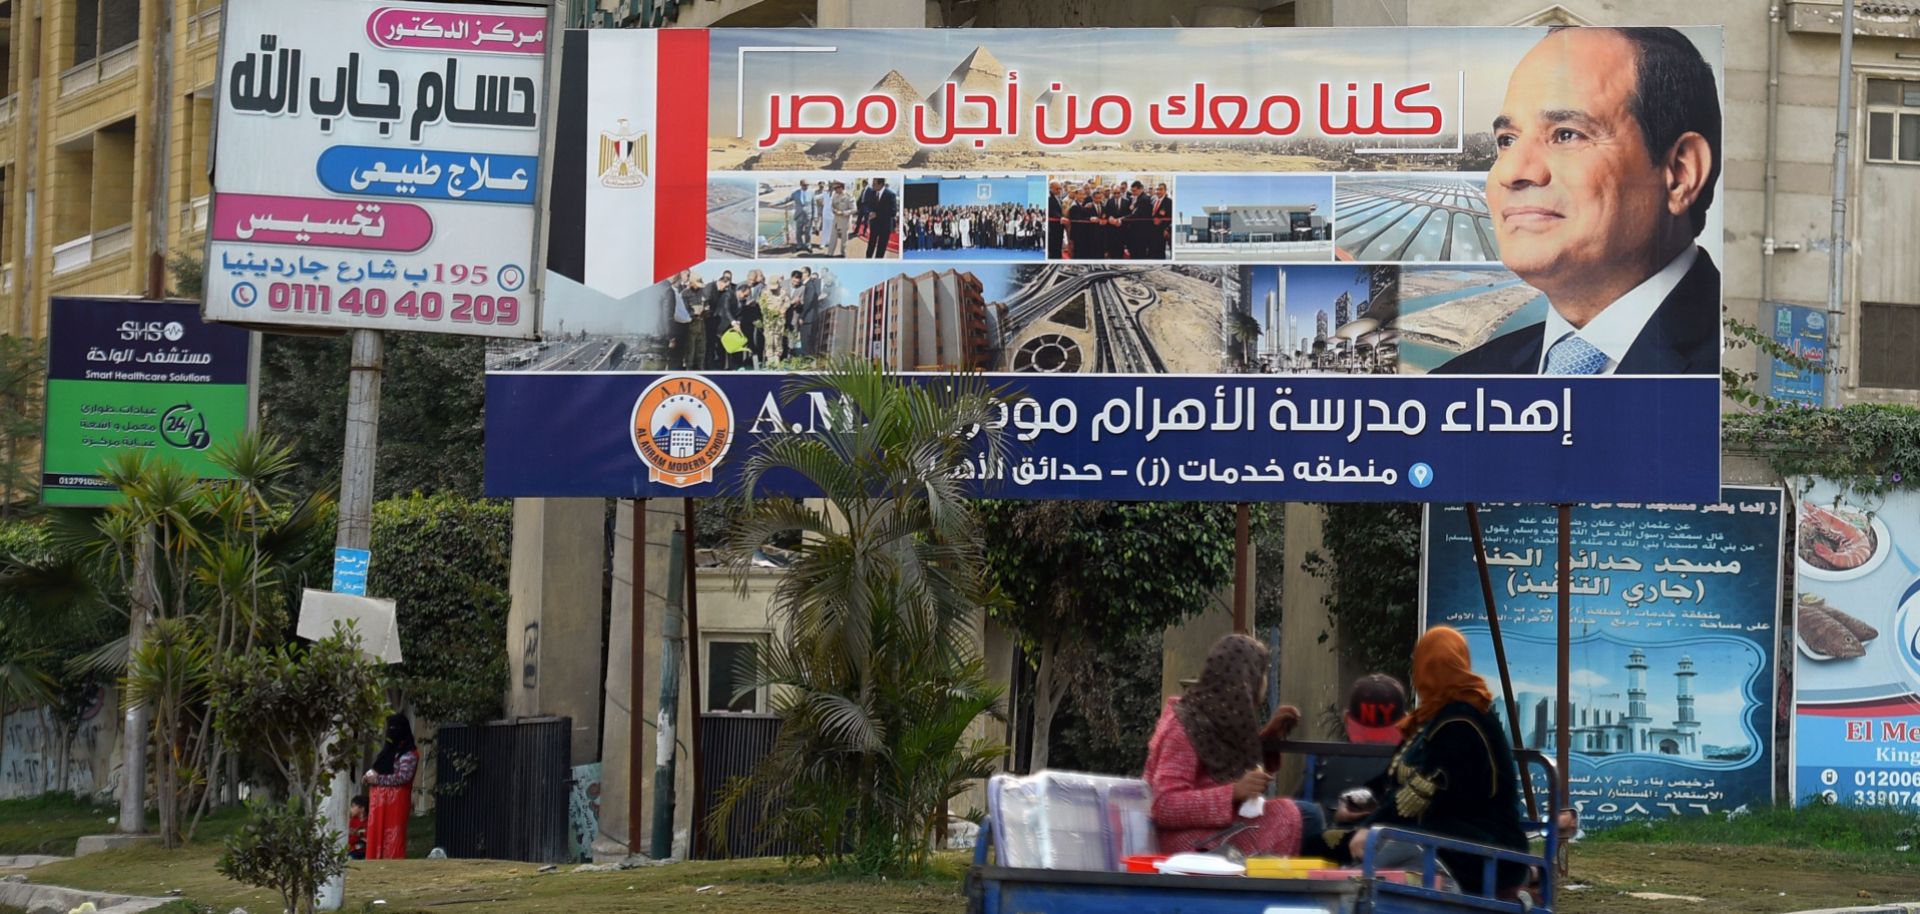 A billboard in Cairo touts the re-election of President Abdel Fattah al-Sisi. As elections approach in March, his opponents from across the political spectrum have found themselves under pressure from the country's military council.